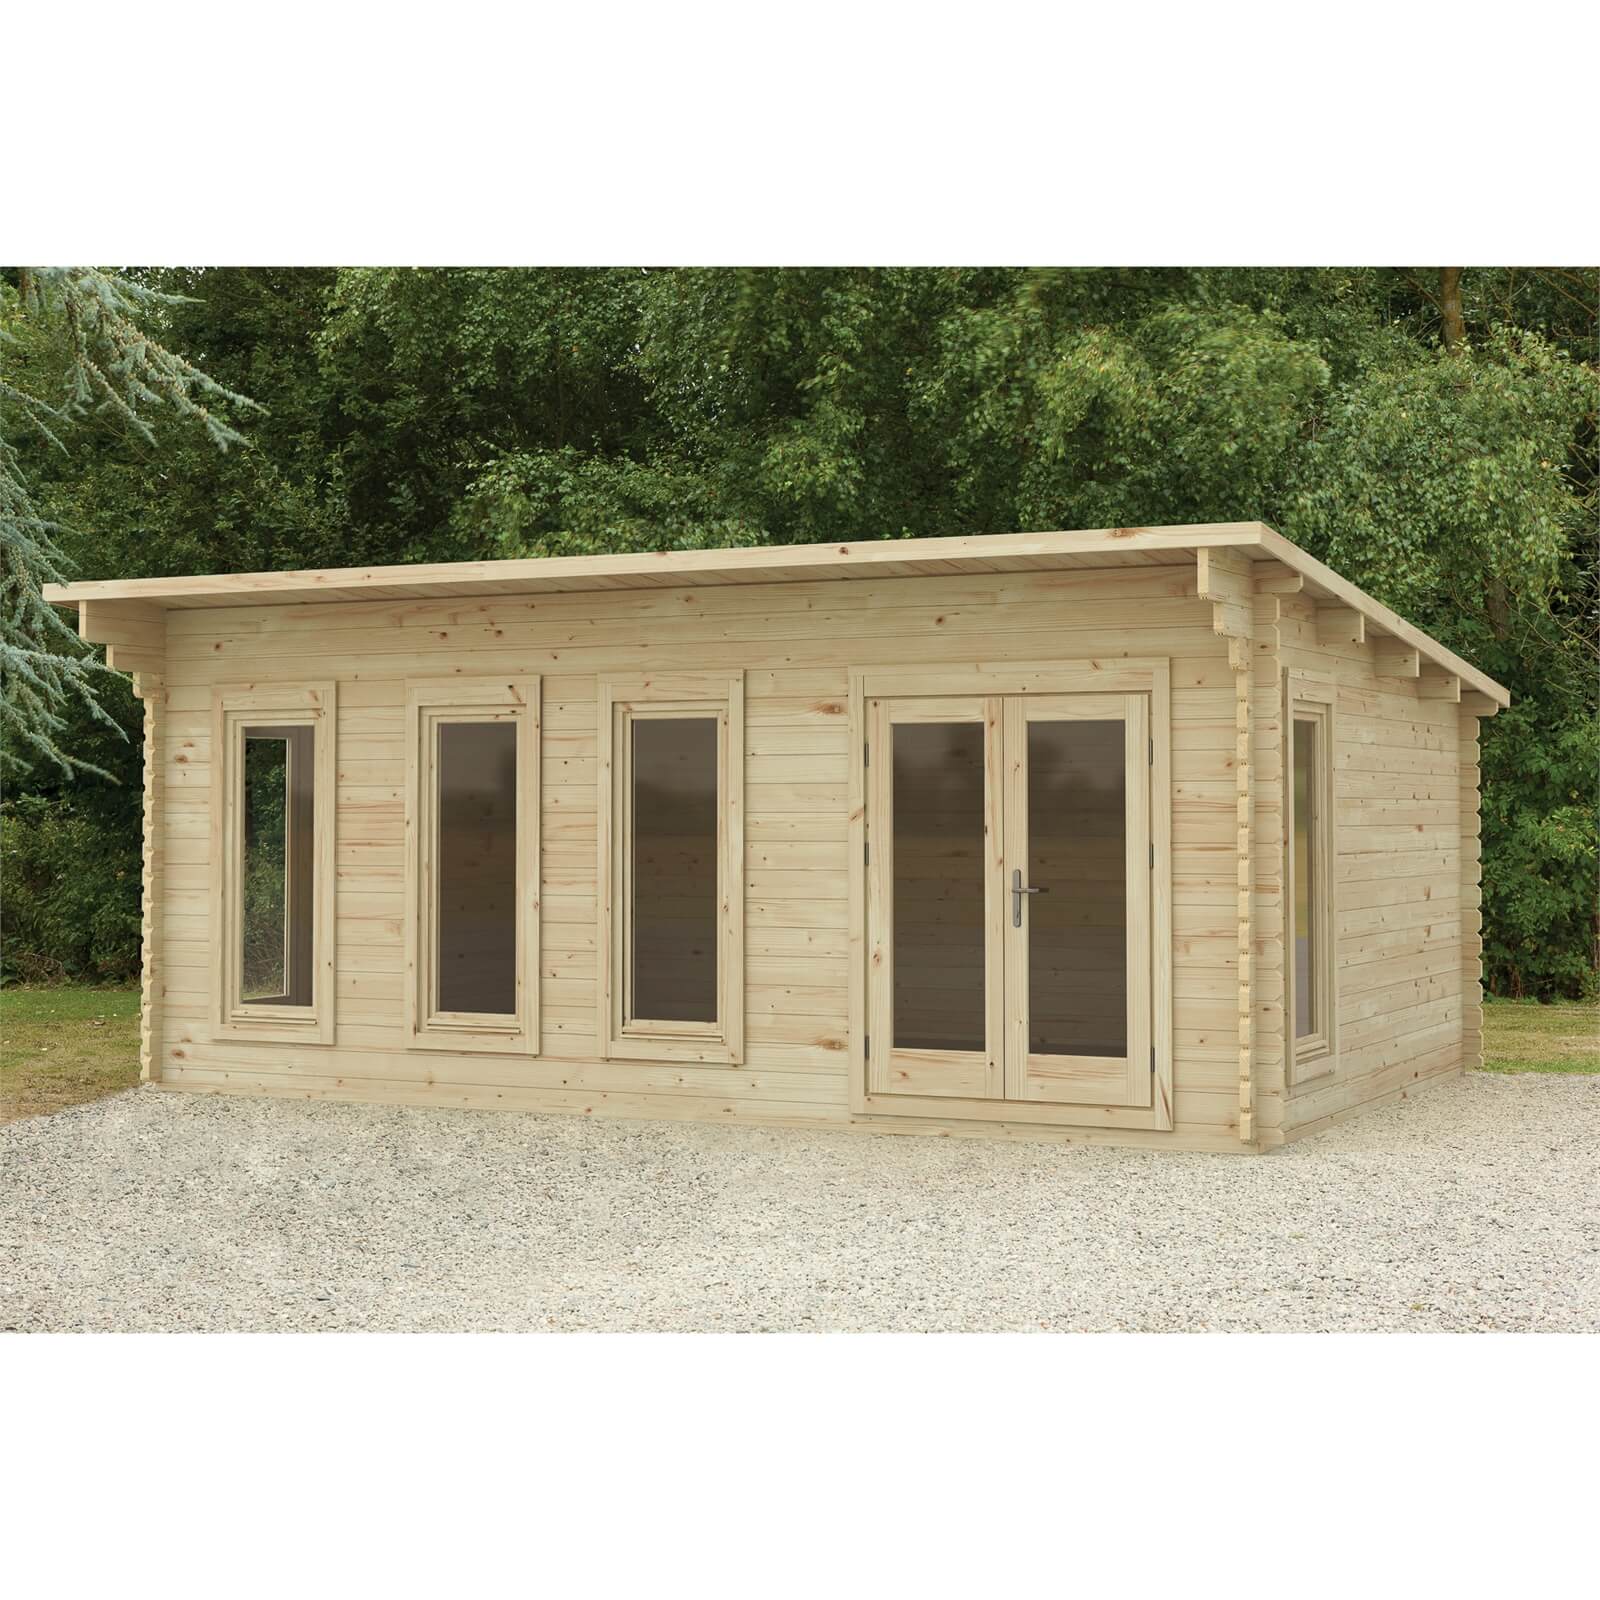 Forest Wolverley 6.0m x 4.0m Log Cabin Double Glazed 24kg Polyester Felt, Plus Underlay - Installation Included